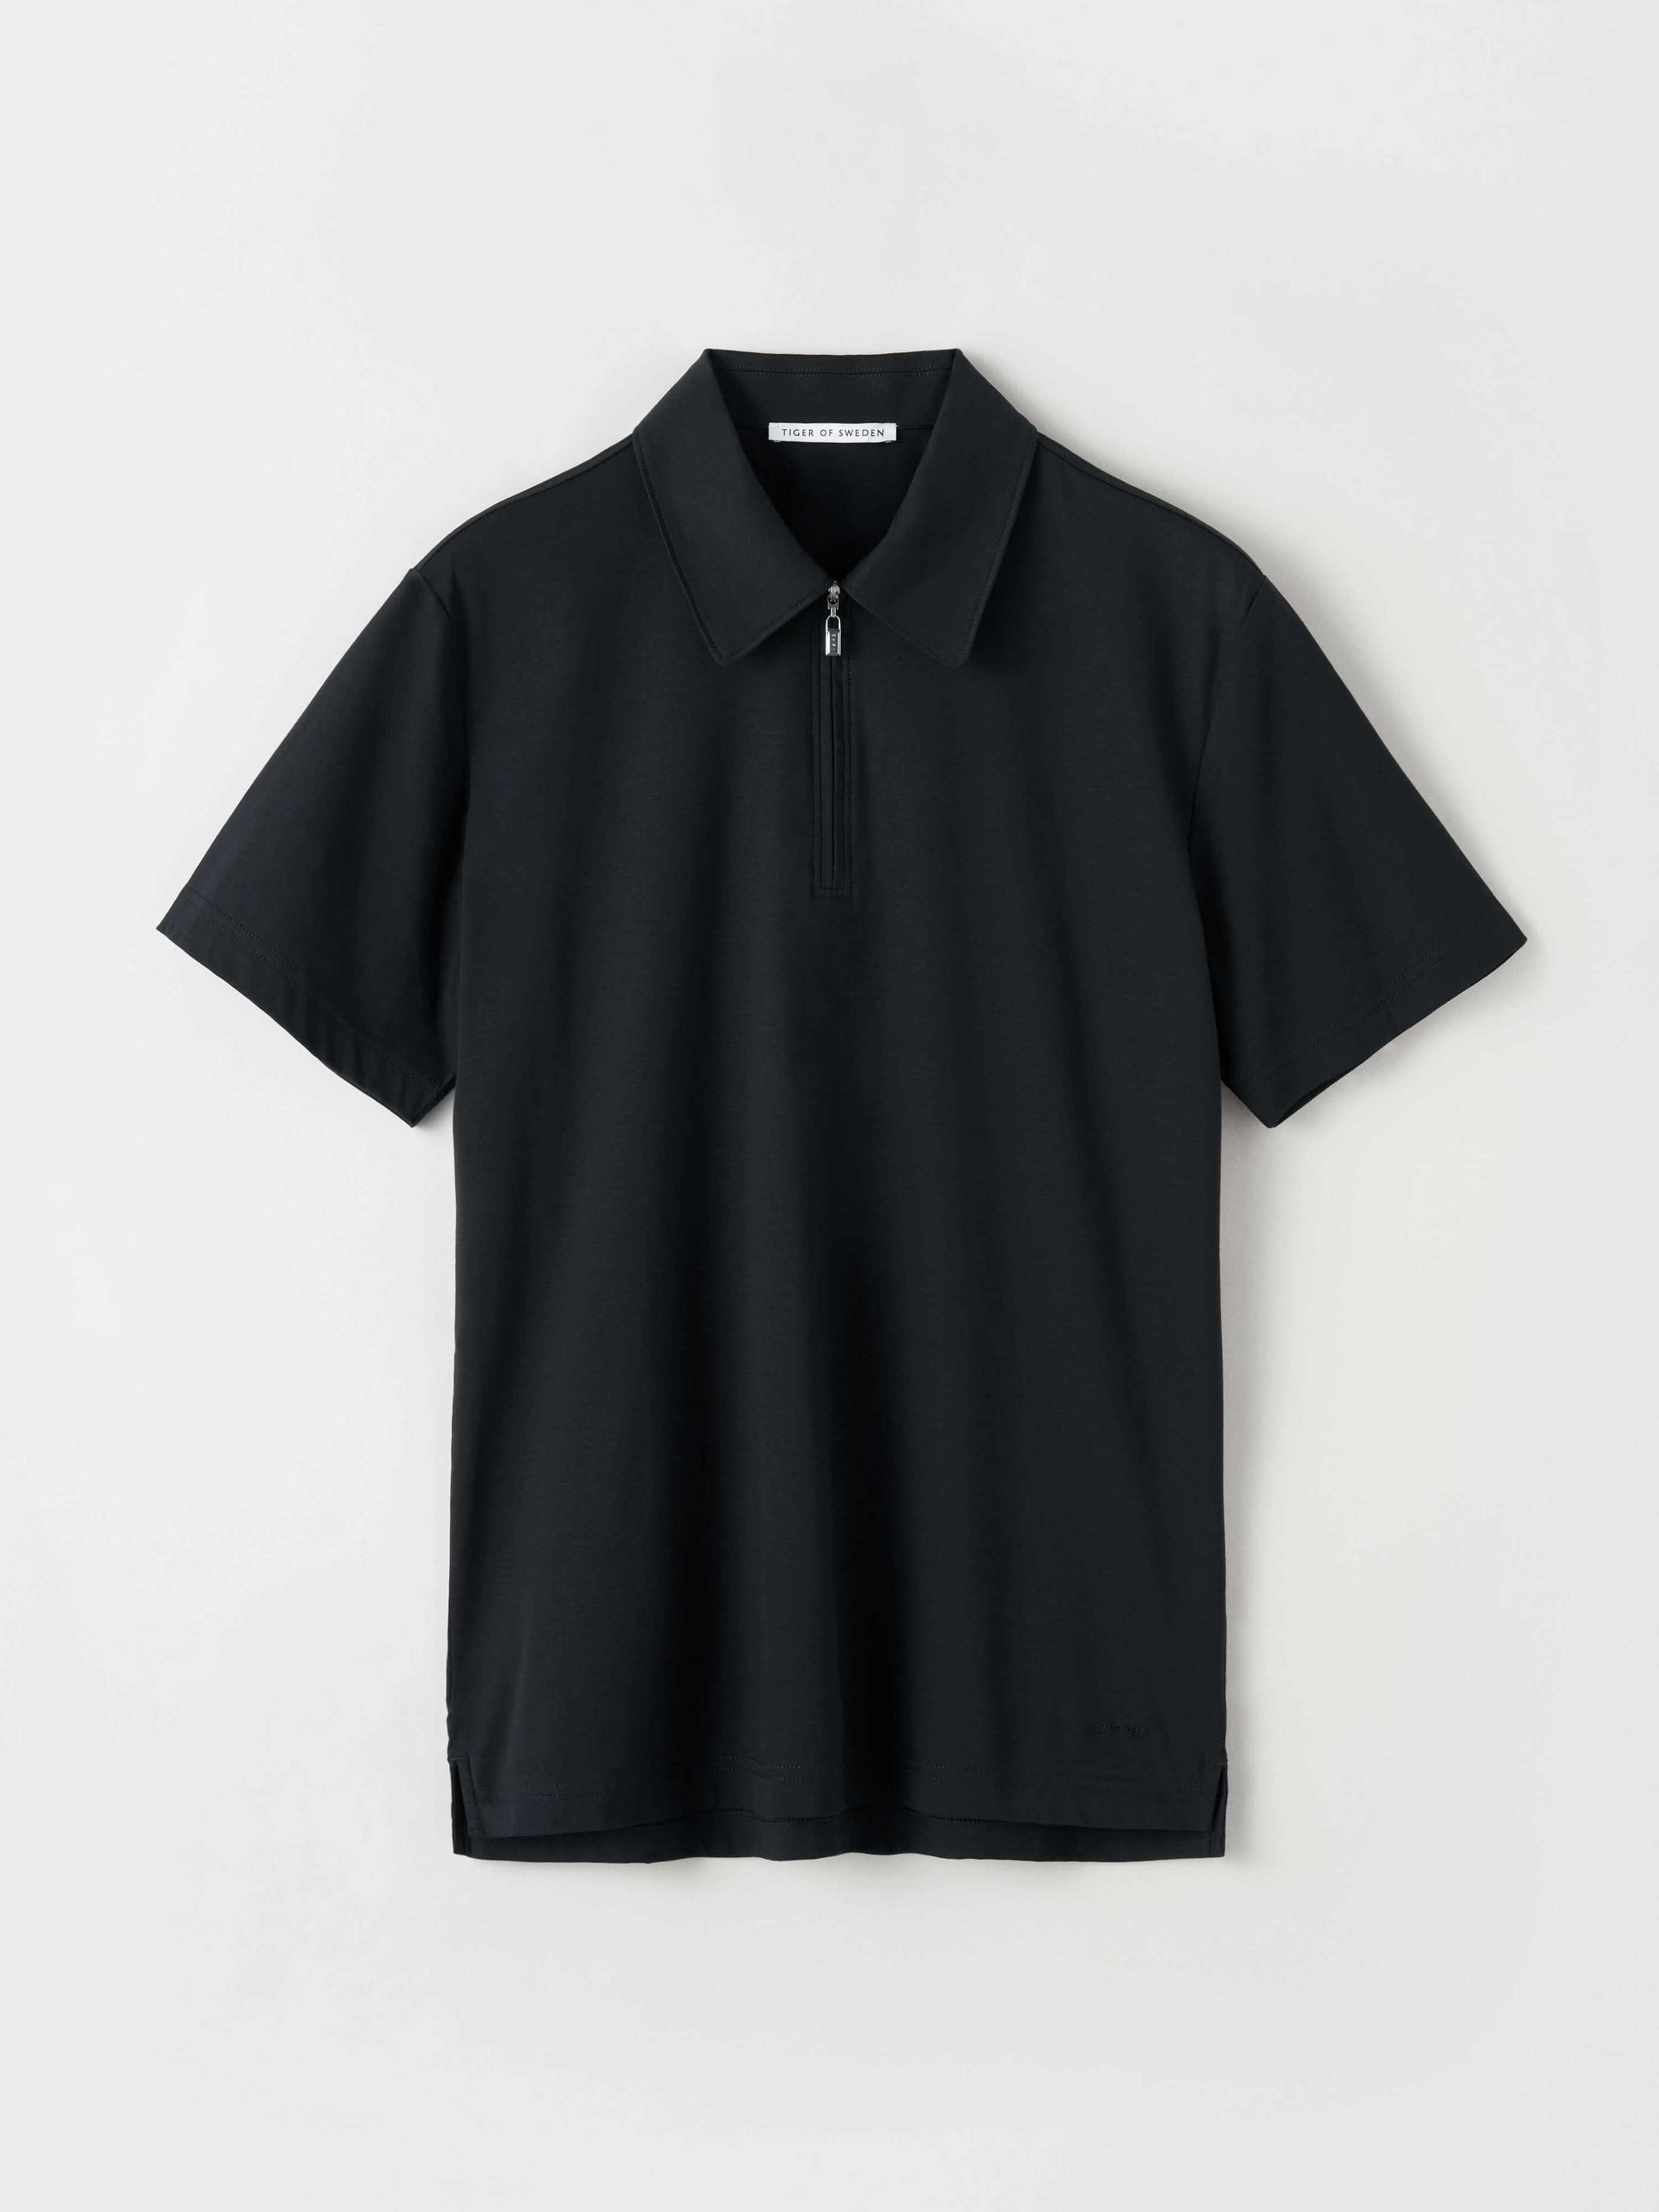 TIGER OF SWEDEN Laron Shirt in Black T68882022 050-BLACK FROM EIGHTYWINGOLD - OFFICIAL BRAND PARTNER